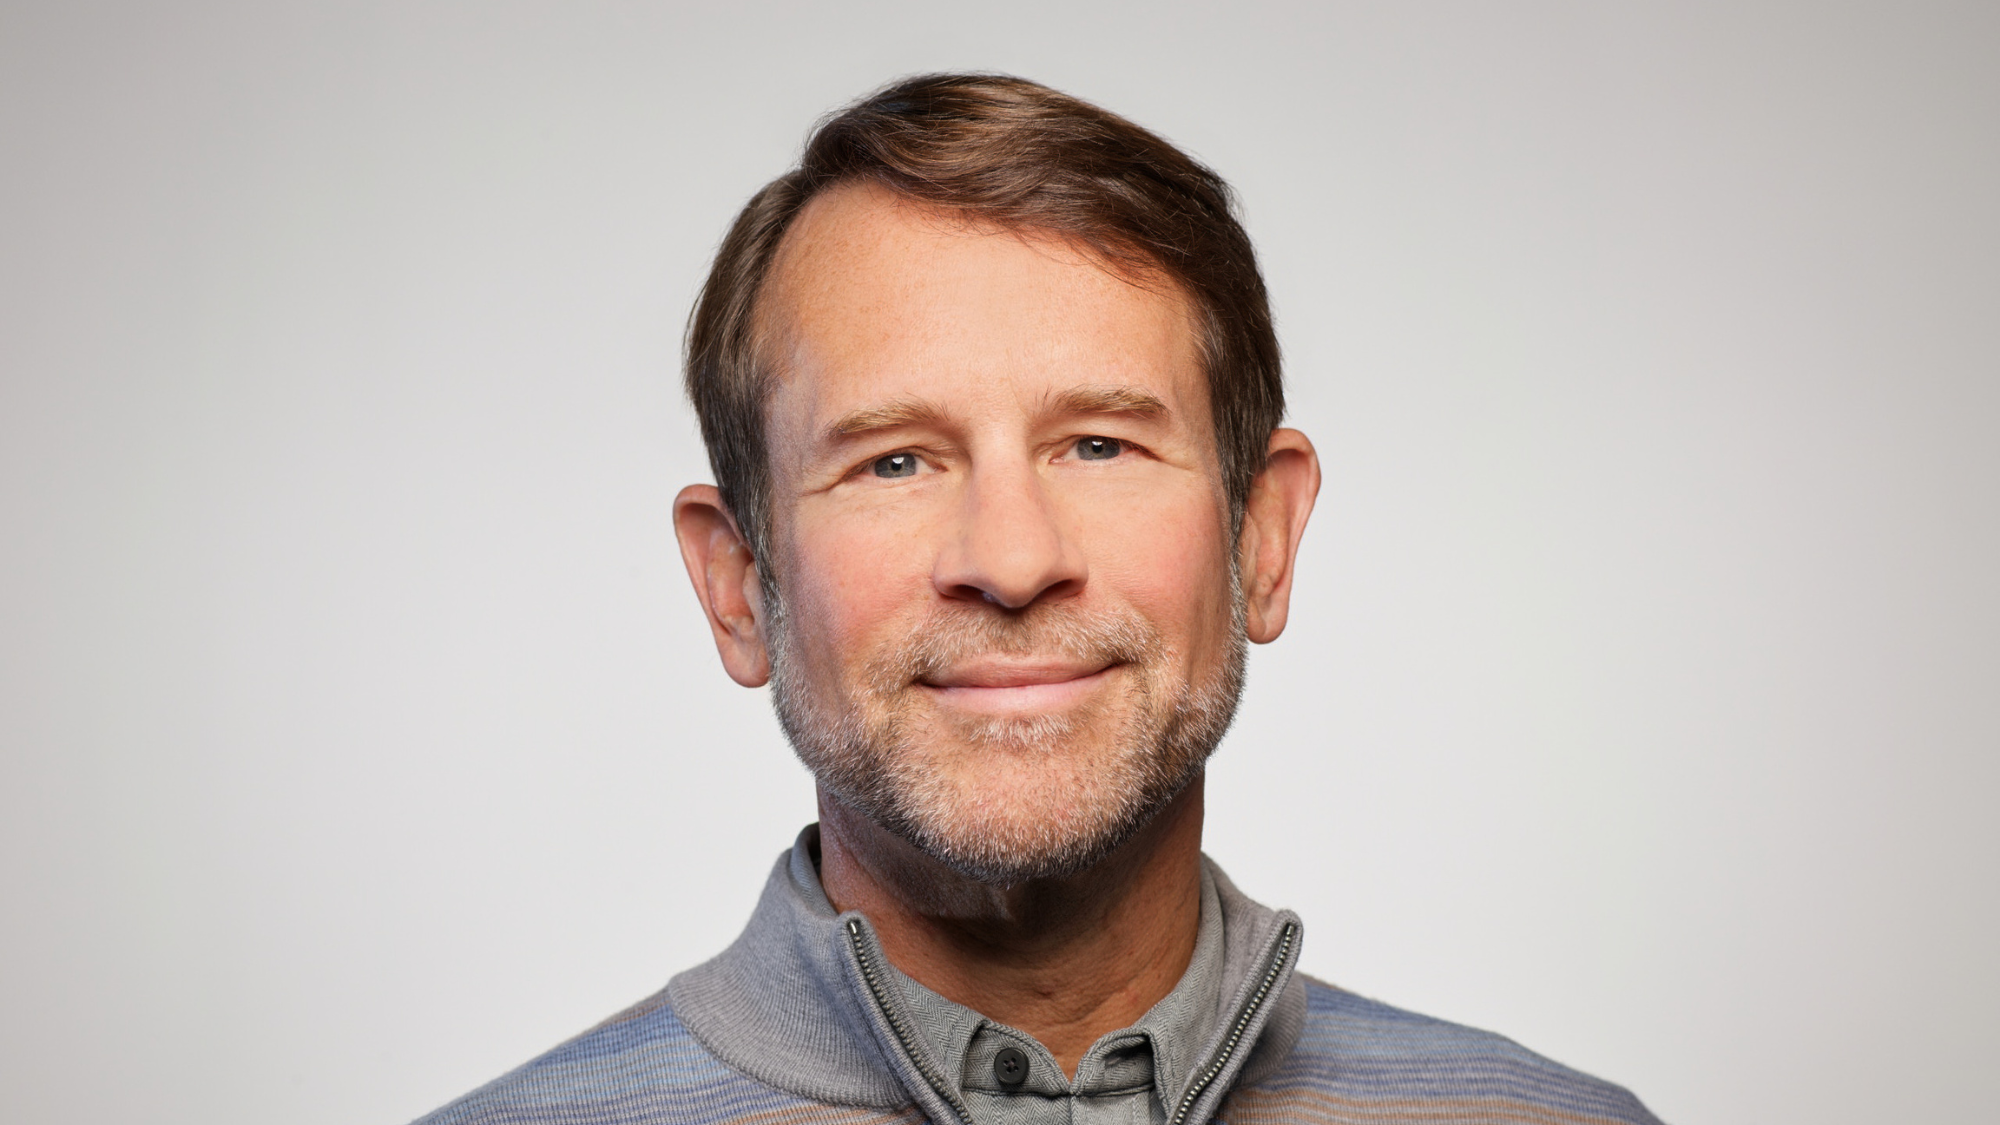 Grant Pickering (MBA'97), Founder and CEO of Vaxcyte